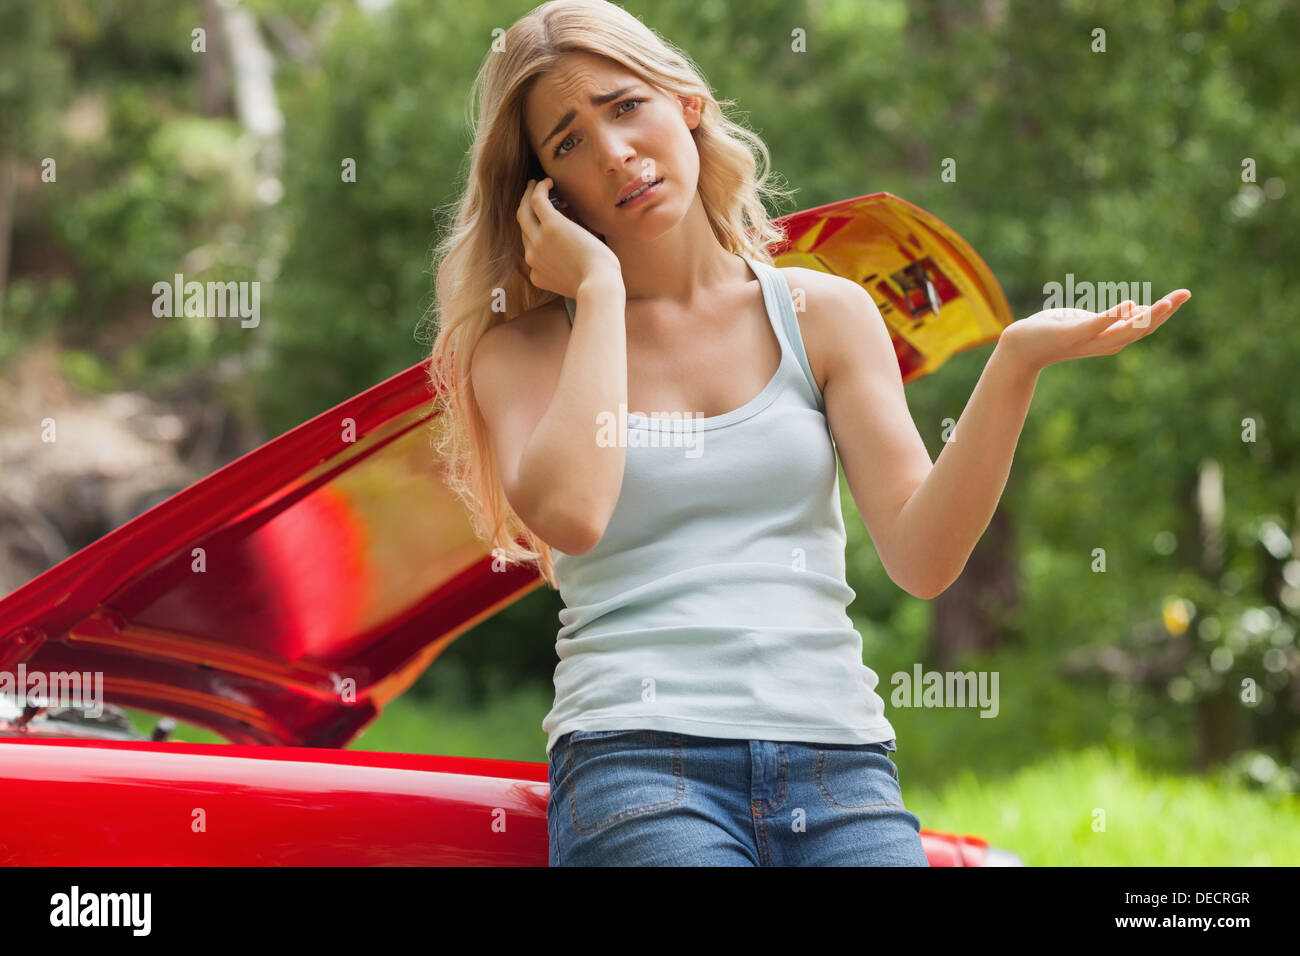 Desperate blonde calling for assistance after breaking down Stock Photo